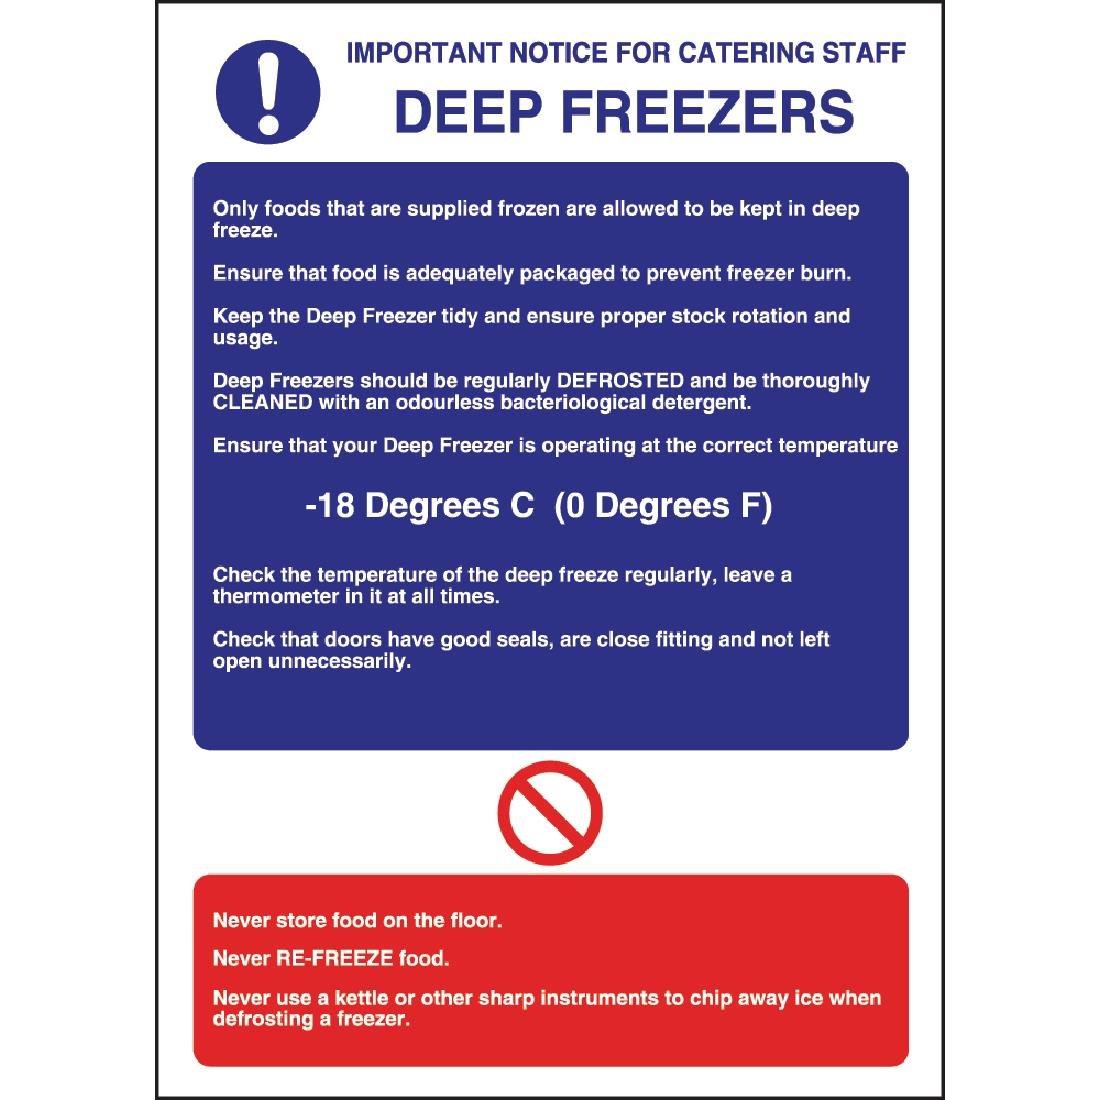 W195 - Deep Freezer Guidelines Sign